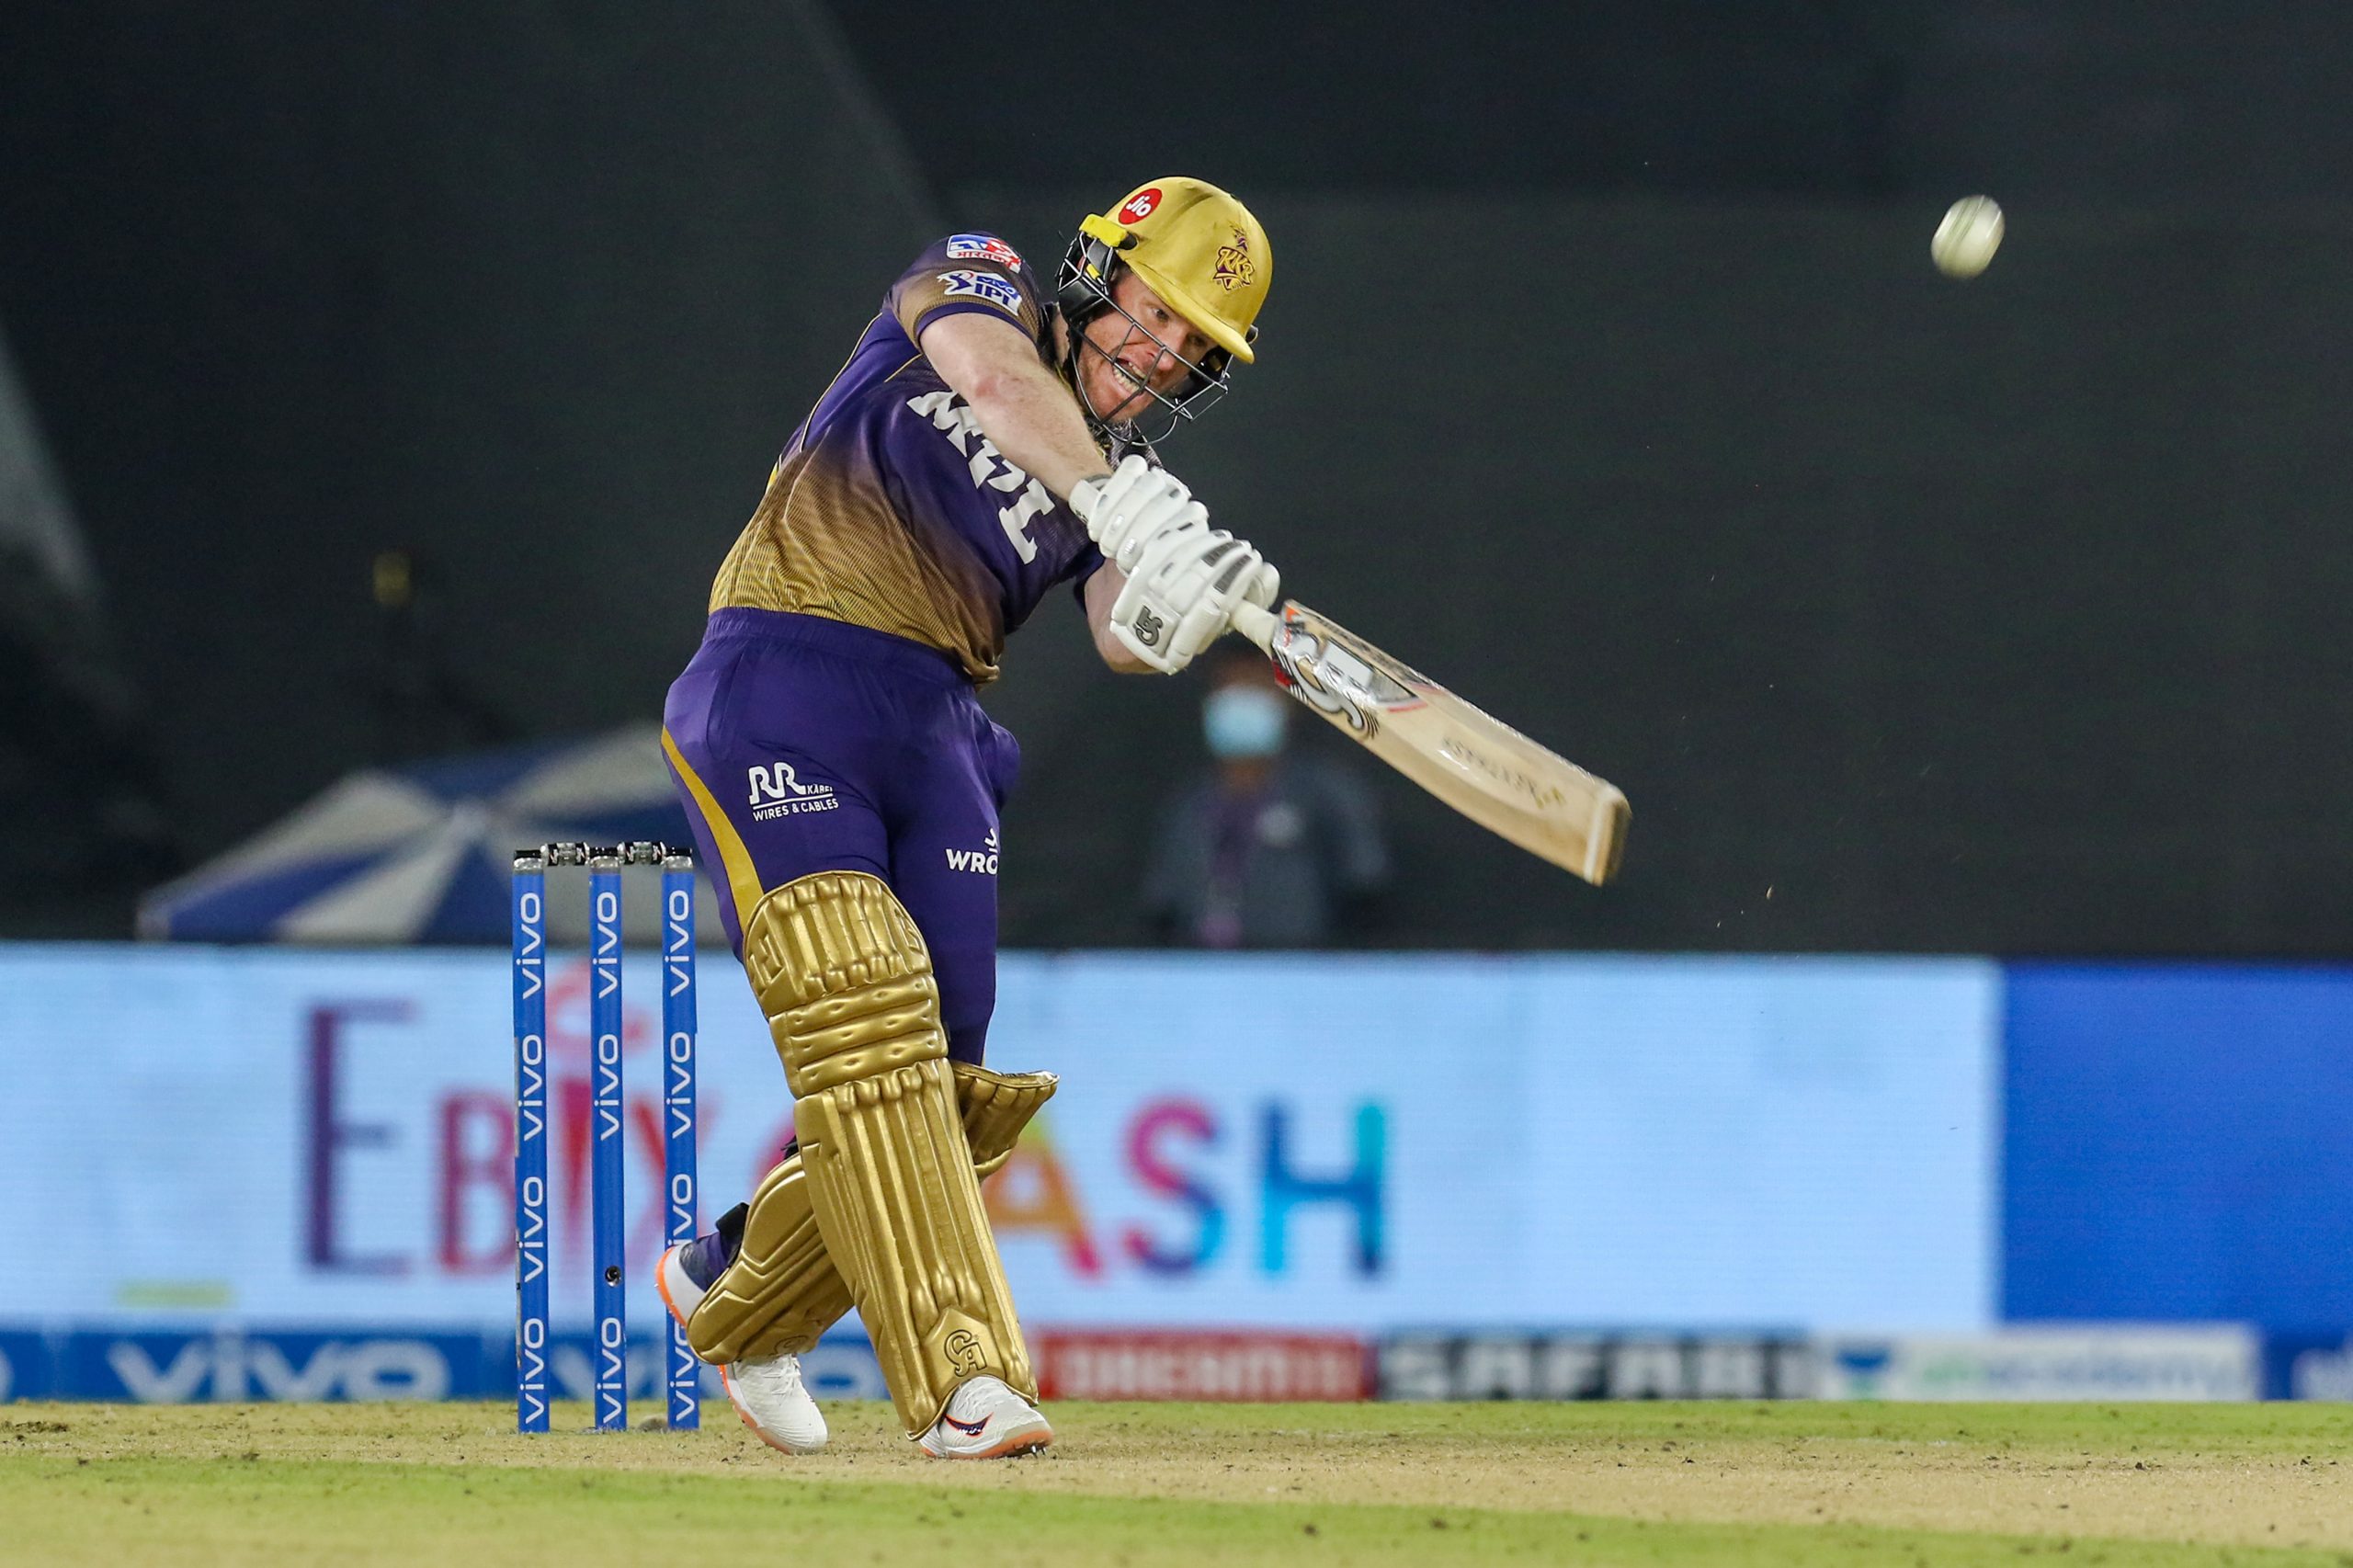 IPL 2021: KKR get past early jitters to win against Punjab Kings